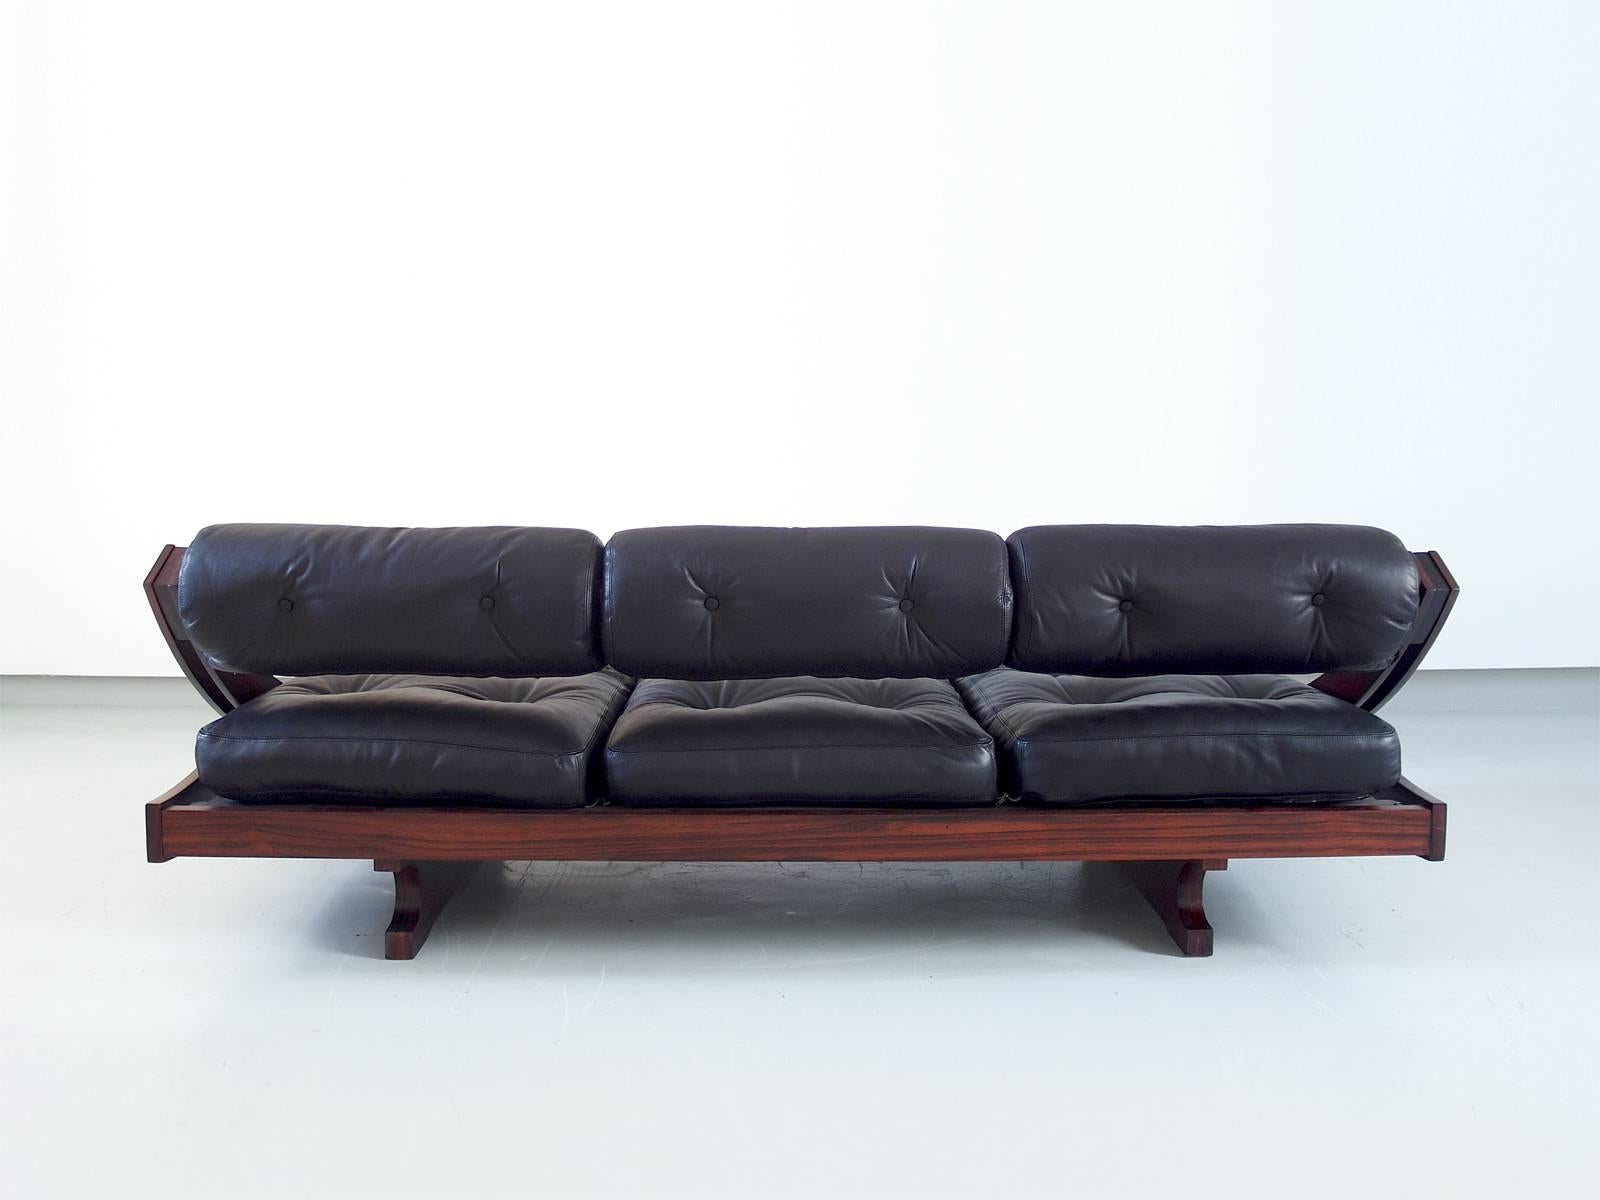 Fully restored GS-195 three-seat daybed sofa designed by Gianni Songia for Sormani, Italy, 1963. Elegant and comfortable daybed sofa with a soft black leather upholstery in perfect condition. The backrest can be adjusted in two positions to use as a